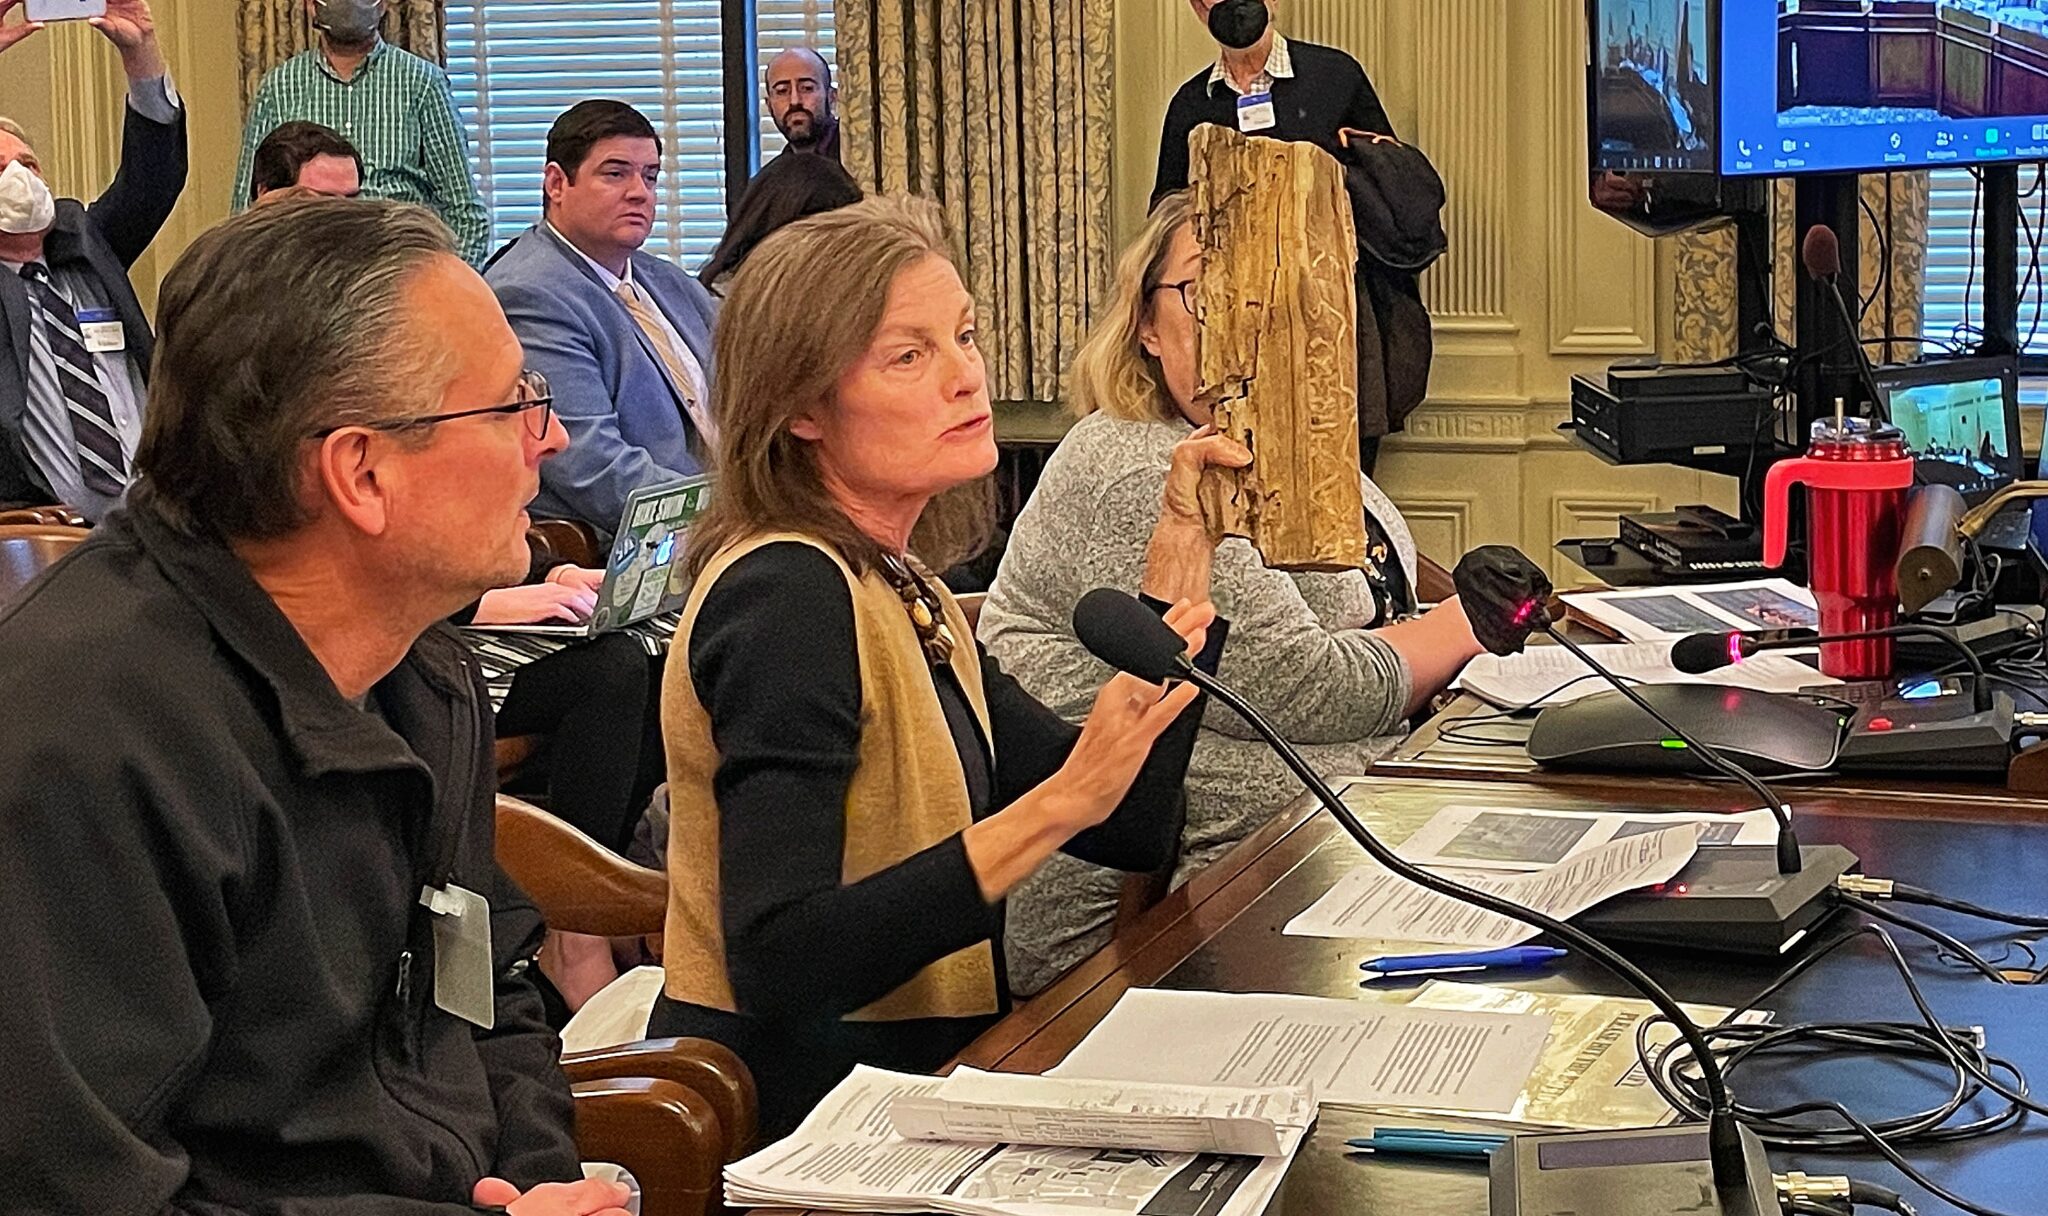 Patricia Shanley of the New Jersey Forest Task Force holds up an invasive plant as she testifies before the Senate environment committee on Dec. 15, 2022, at the Statehouse in Trenton. (Photo by Dana DiFilippo | New Jersey Monitor)